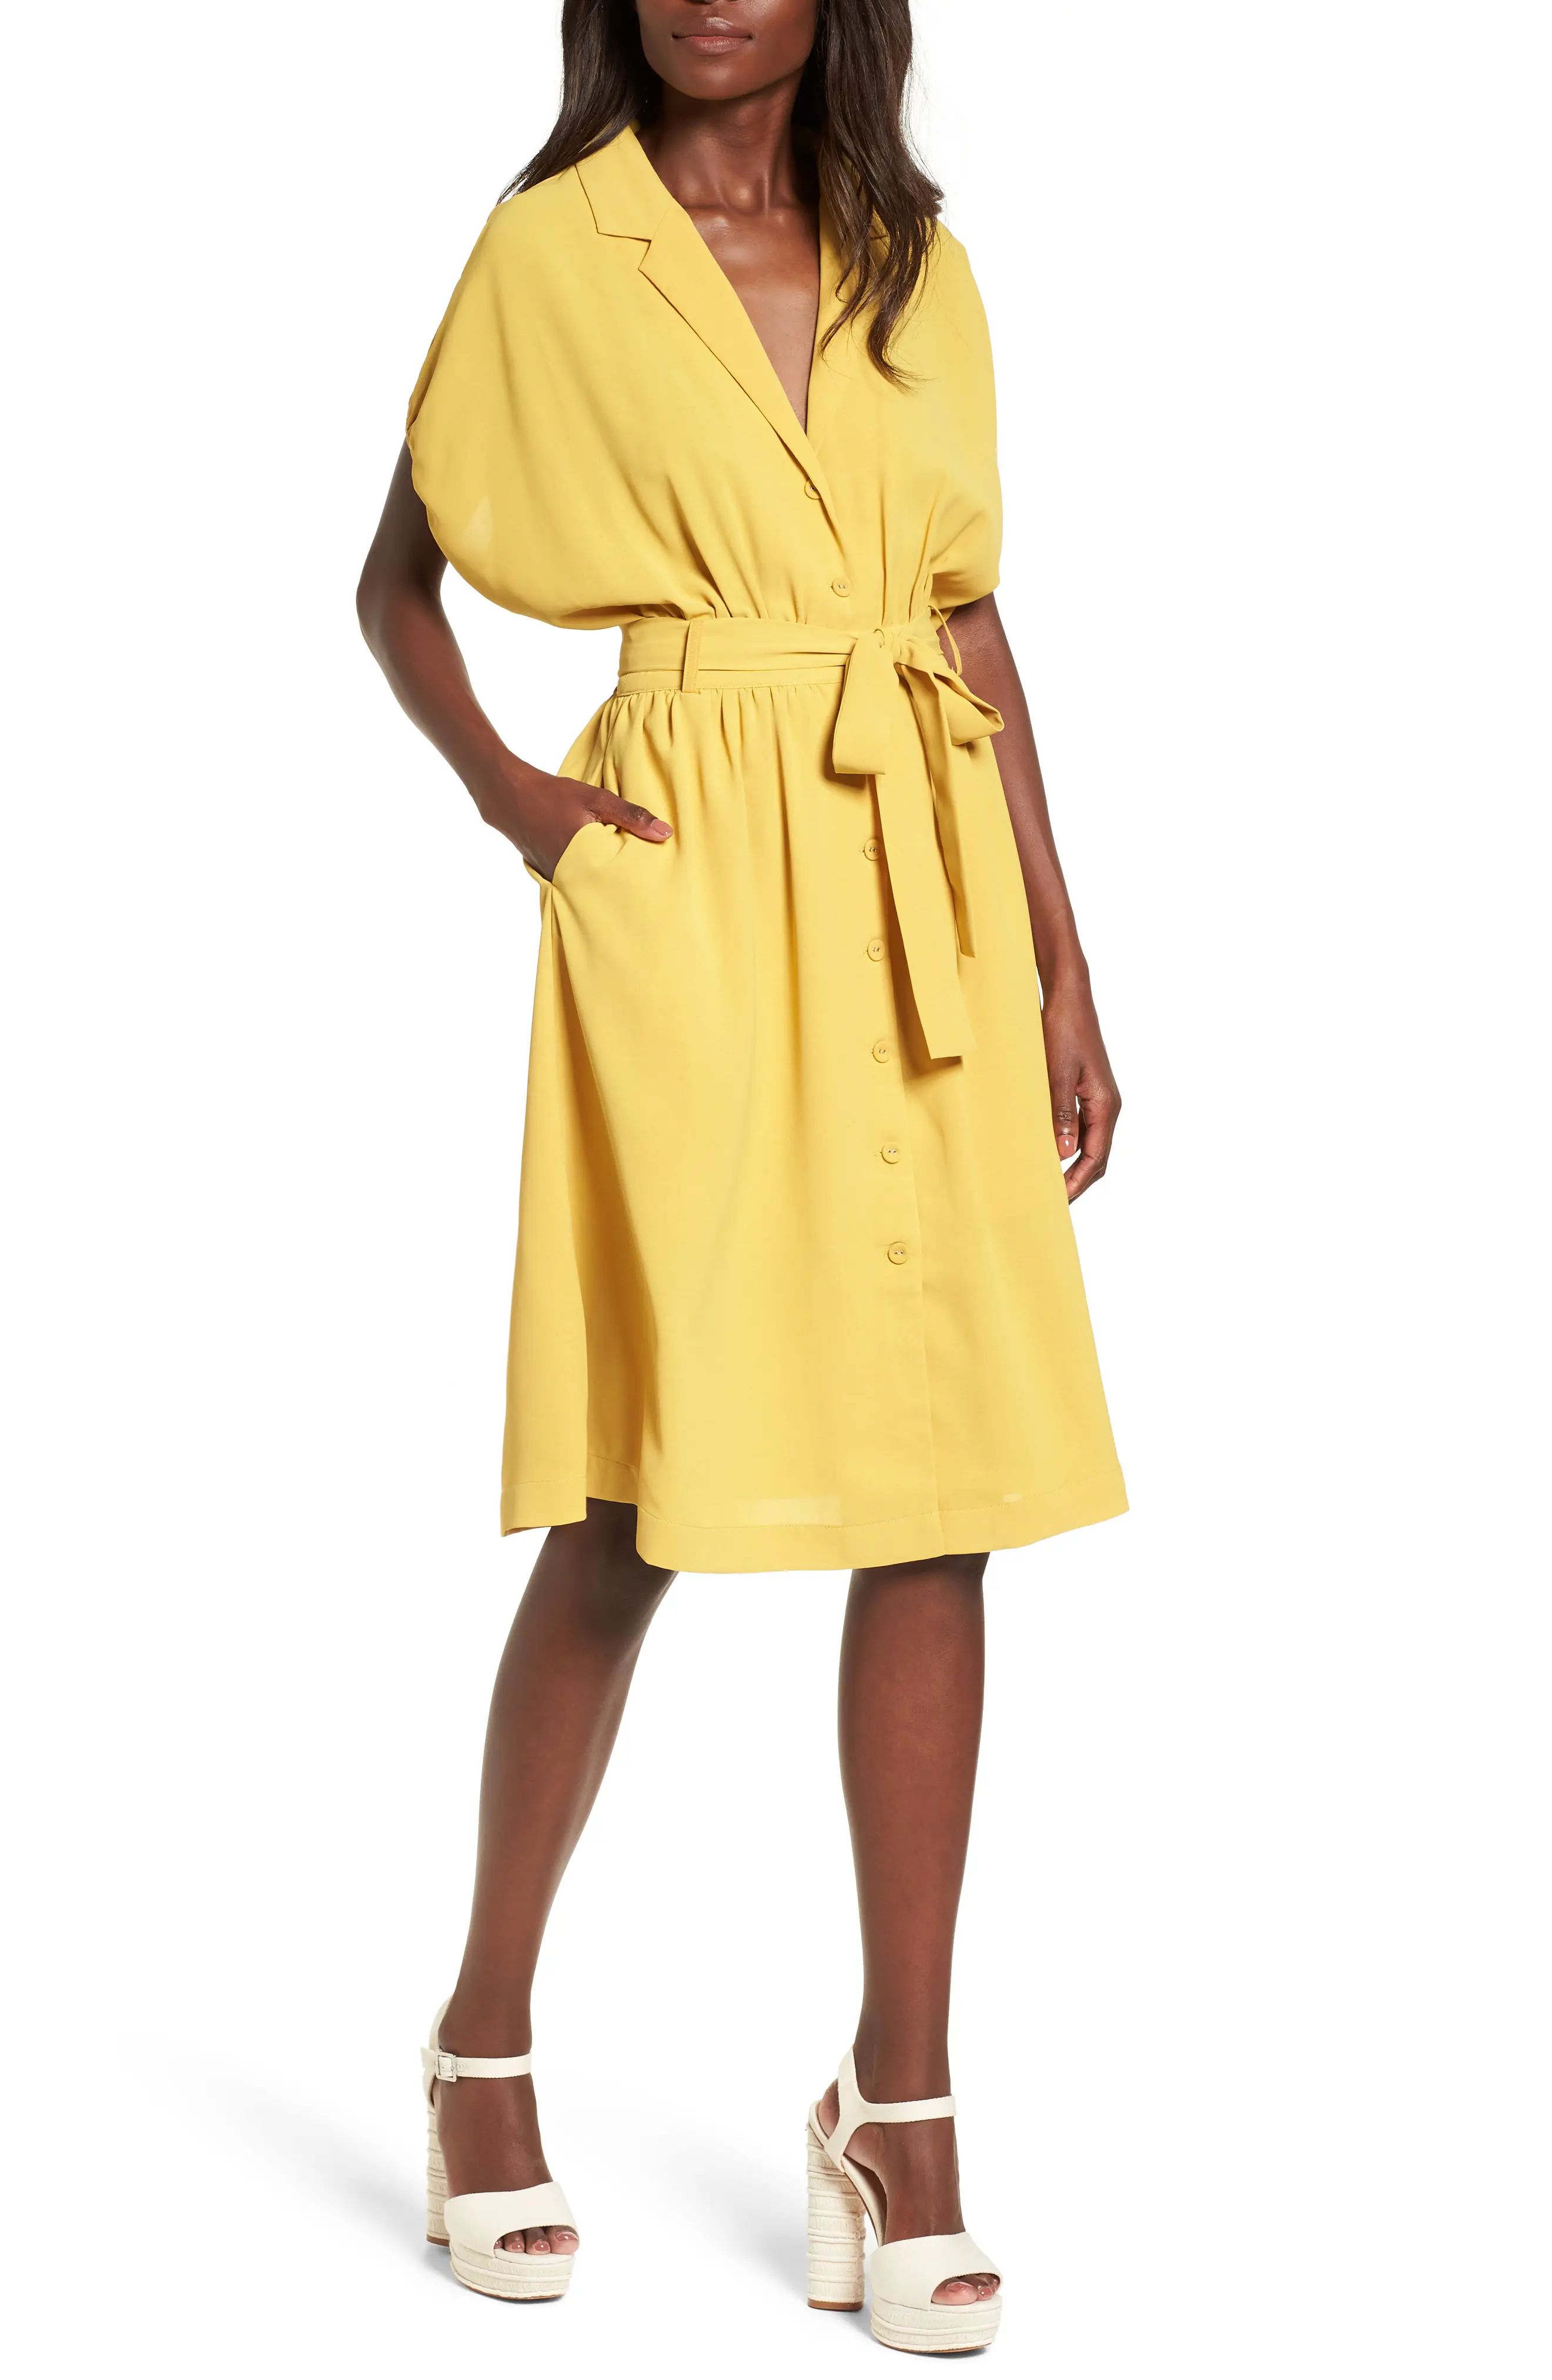 Chriselle x J.O.A. Cocoon Sleeve Dress | Nordstrom